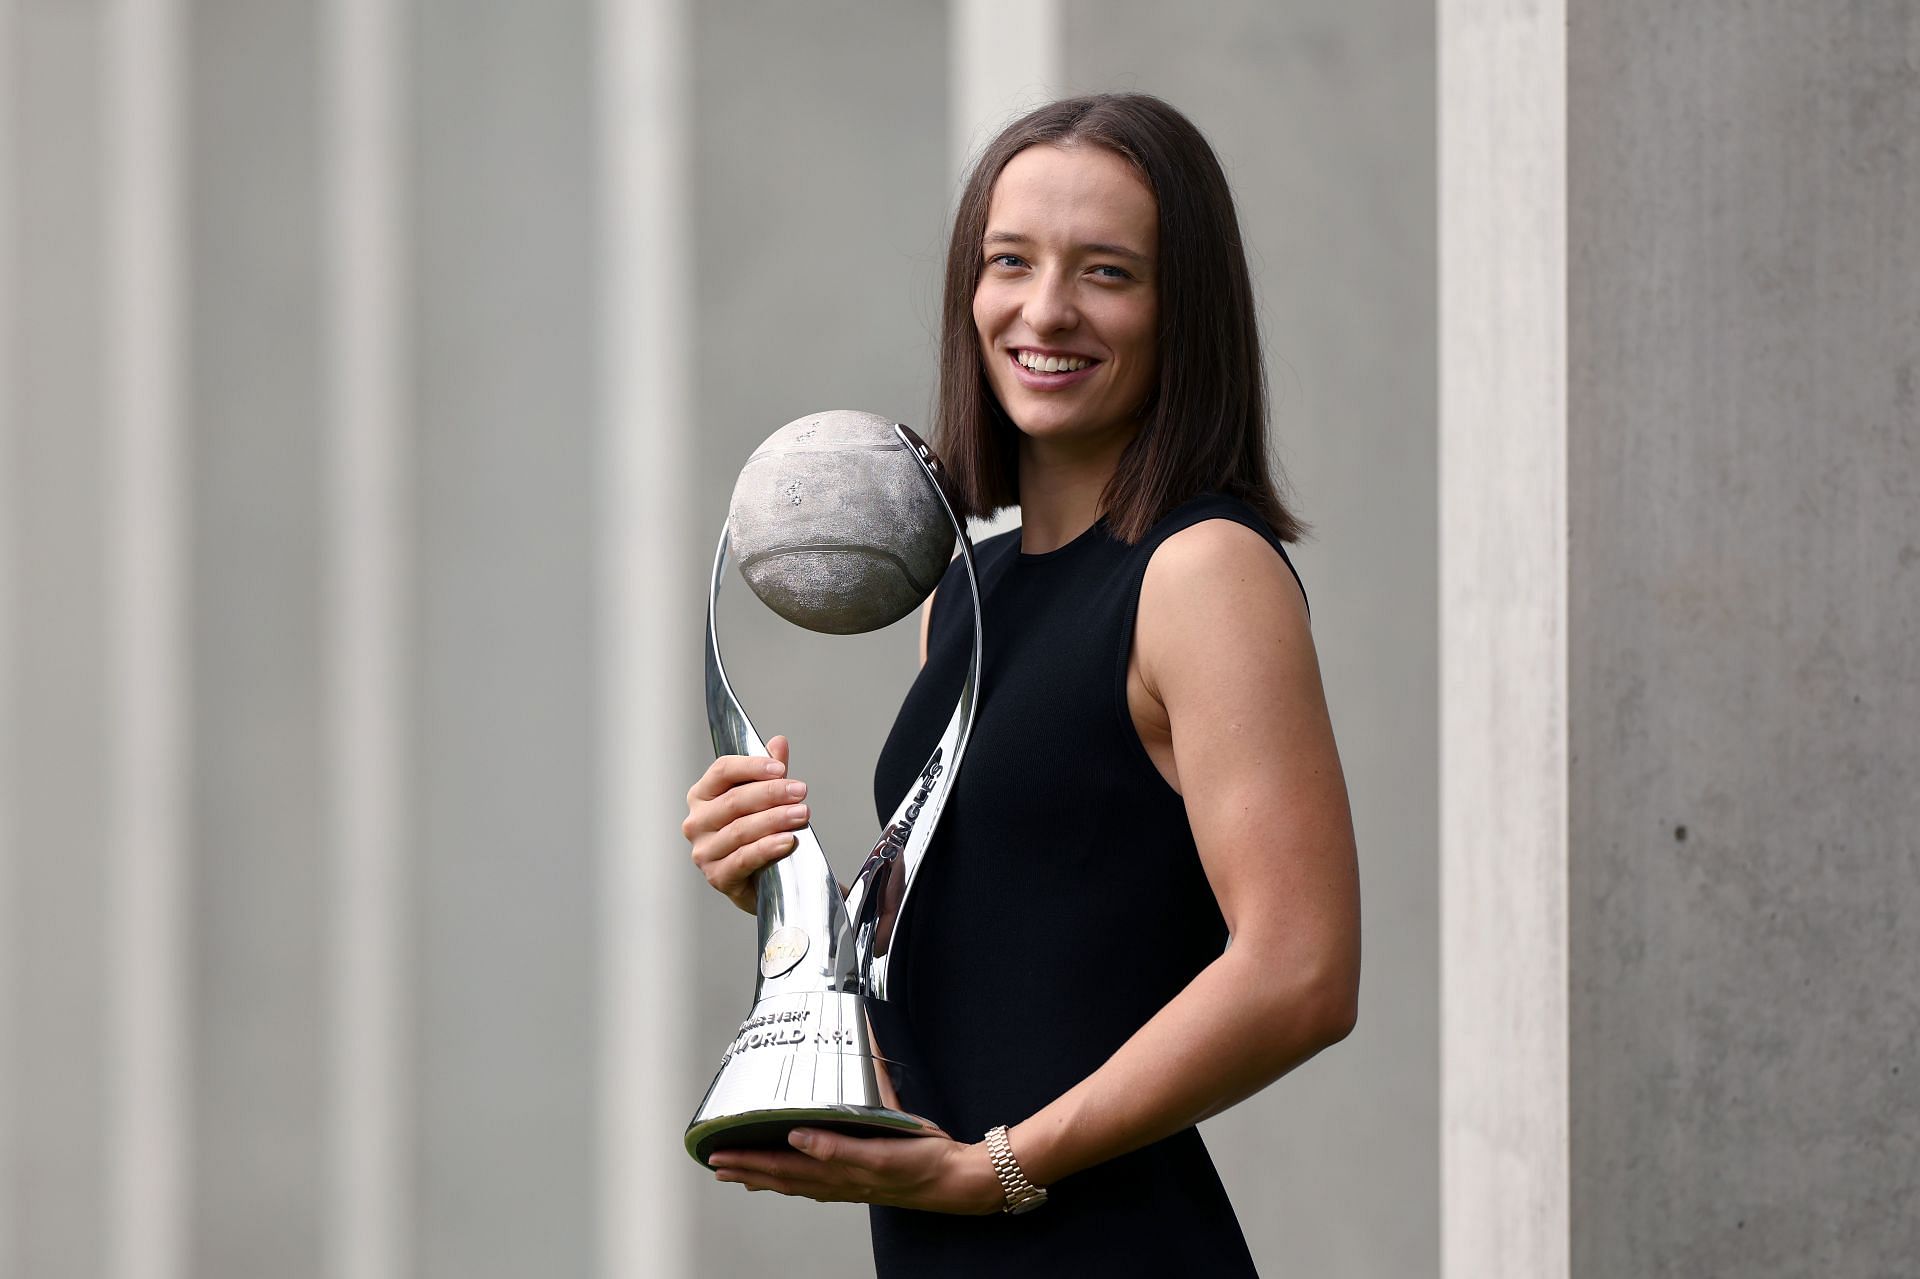 Iga Swiatek poses with her year-end No. 1 trophy.